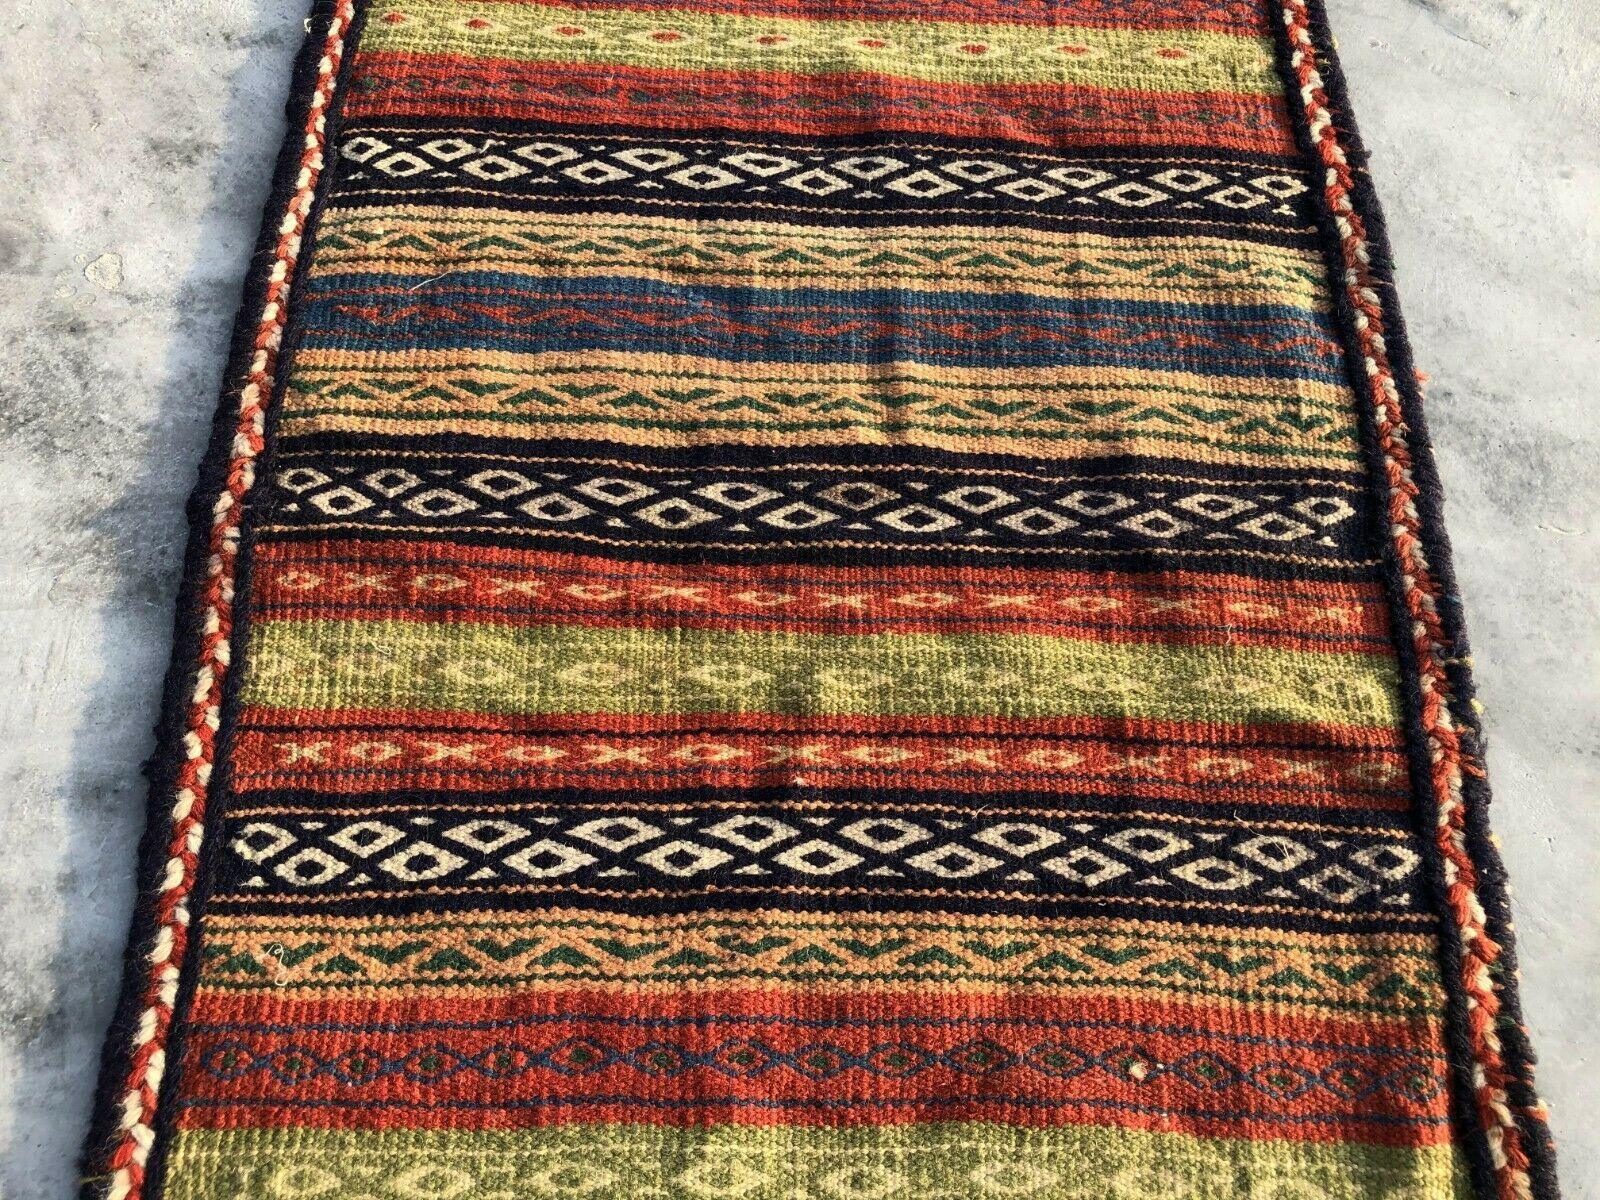 Authentic Hand Knotted Shrz Wool Kilim Kilm Area Rug 2.5 x 1.10 Ft